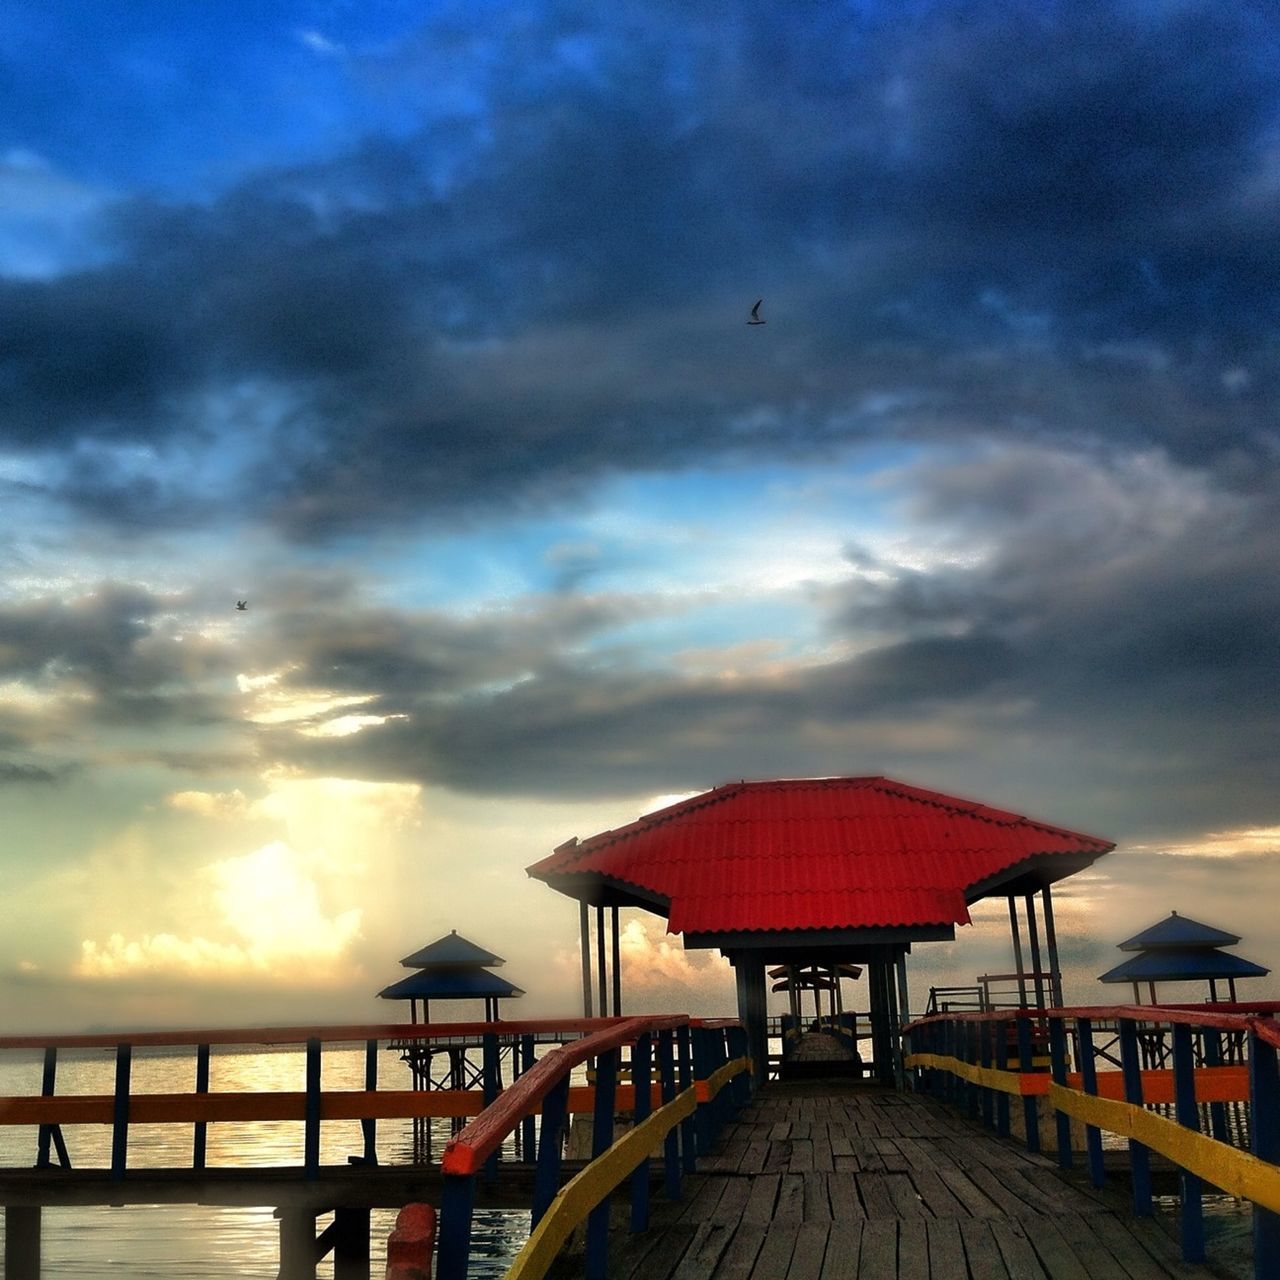 sky, cloud - sky, built structure, sea, architecture, railing, cloudy, pier, sunset, water, cloud, horizon over water, nature, scenics, tranquility, beauty in nature, beach, building exterior, the way forward, tranquil scene